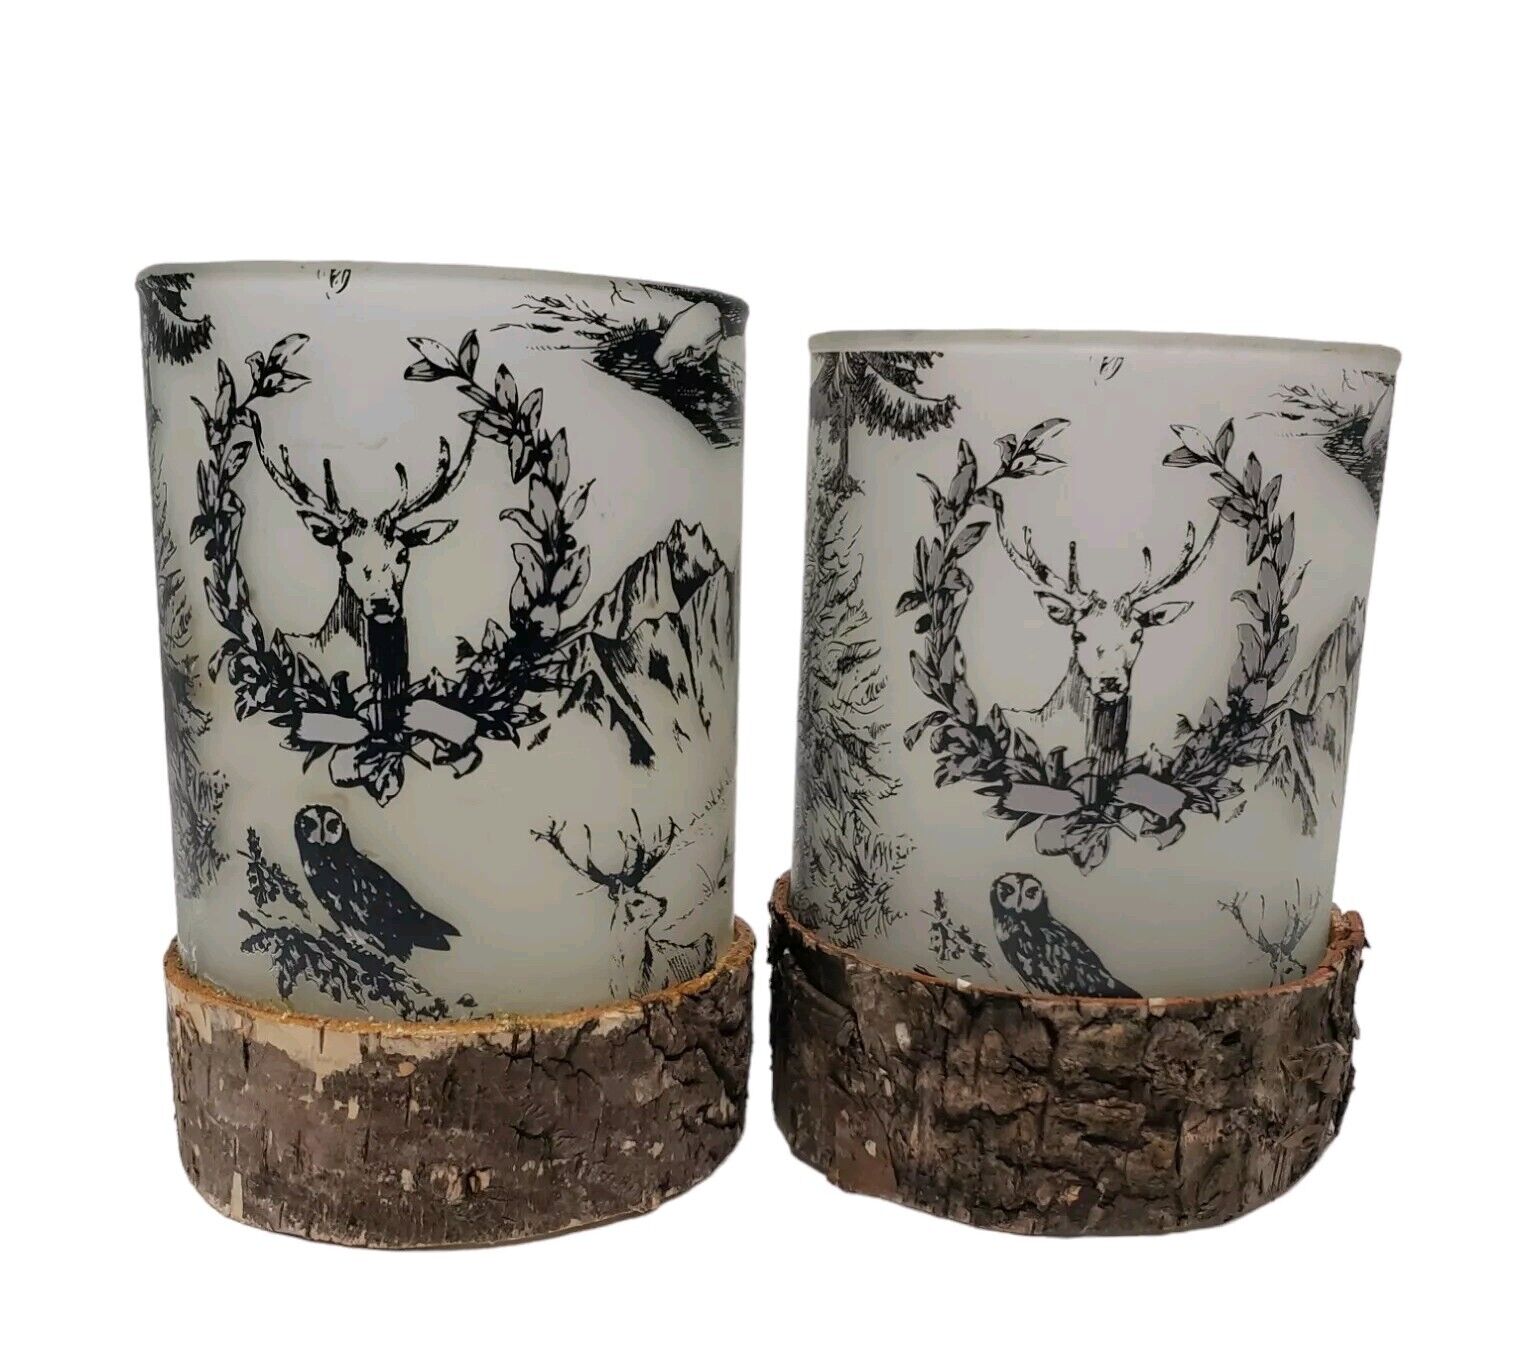 2 Debi Lilly Rustic Frosted Glass Bark Candle Holders Deer cabin decor